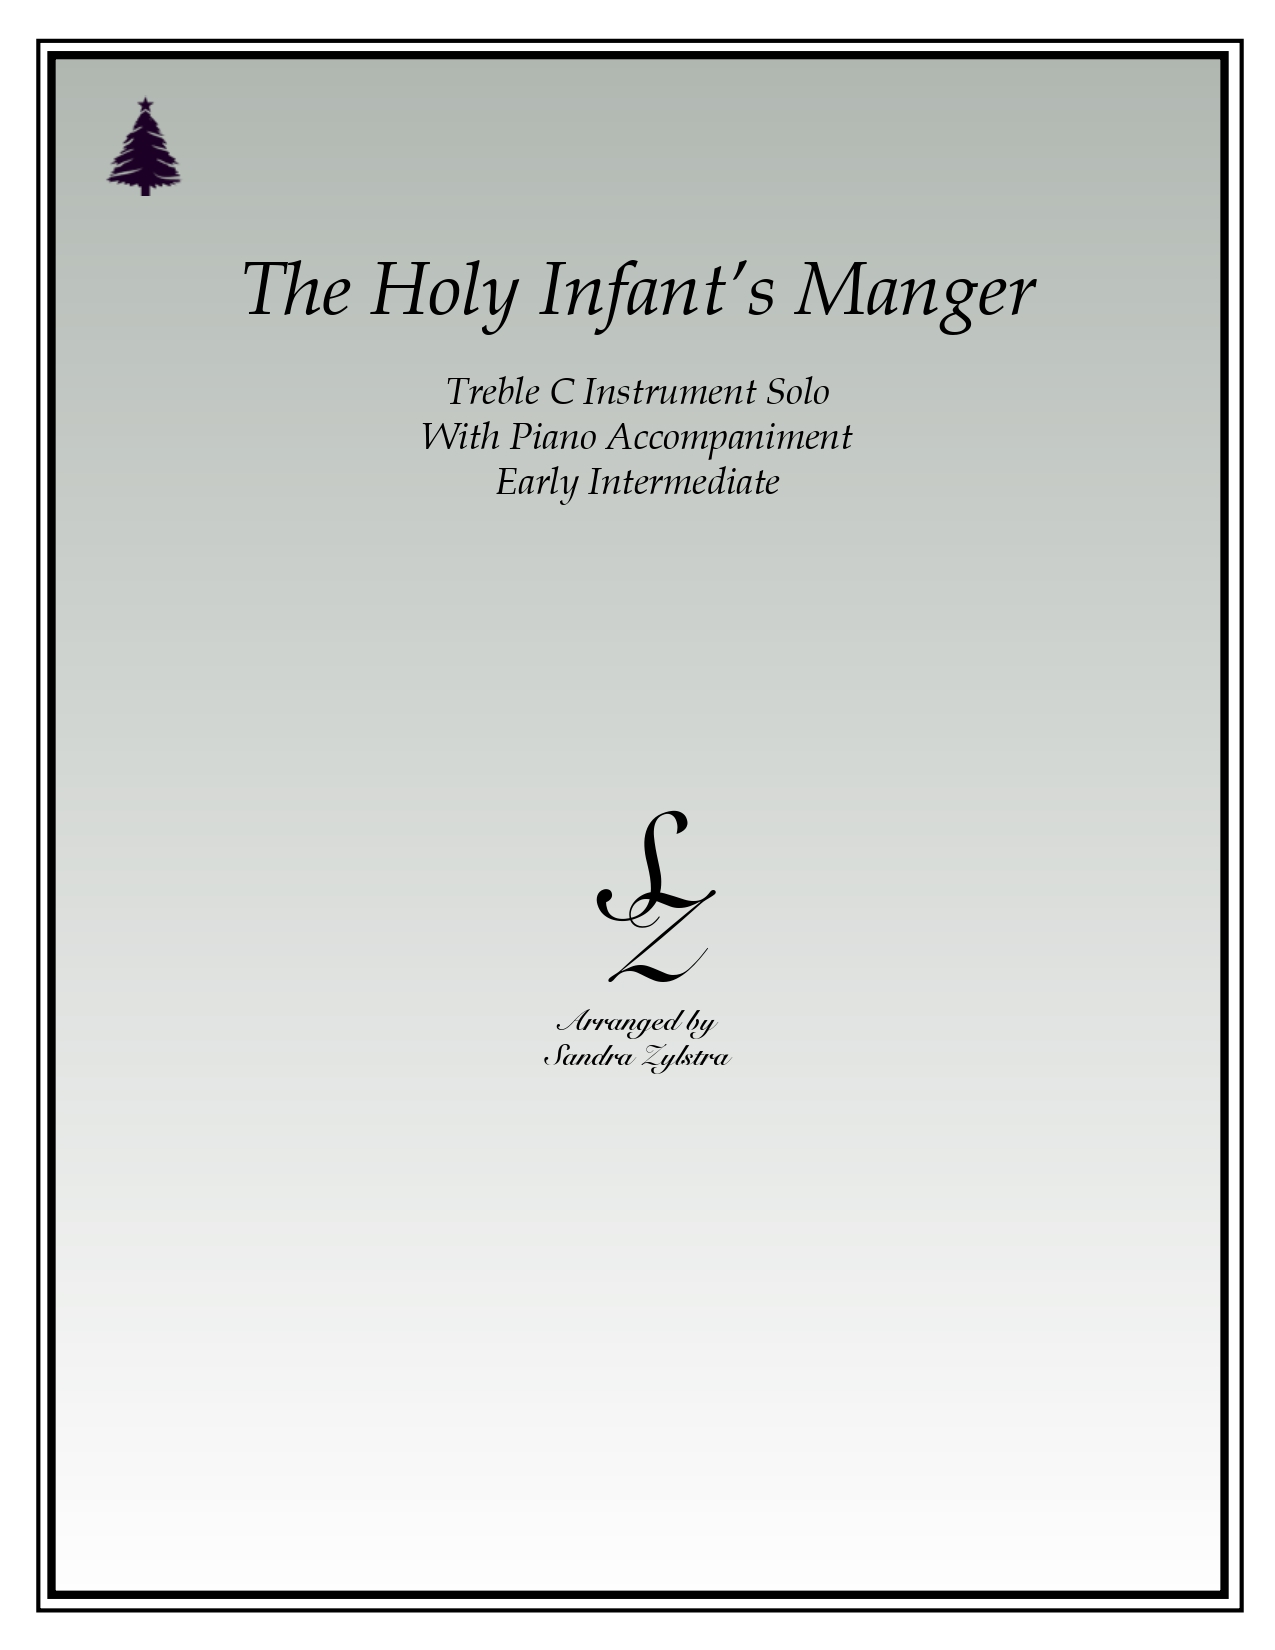 The Holy Infants Manger treble C instrument solo part cover page 00011